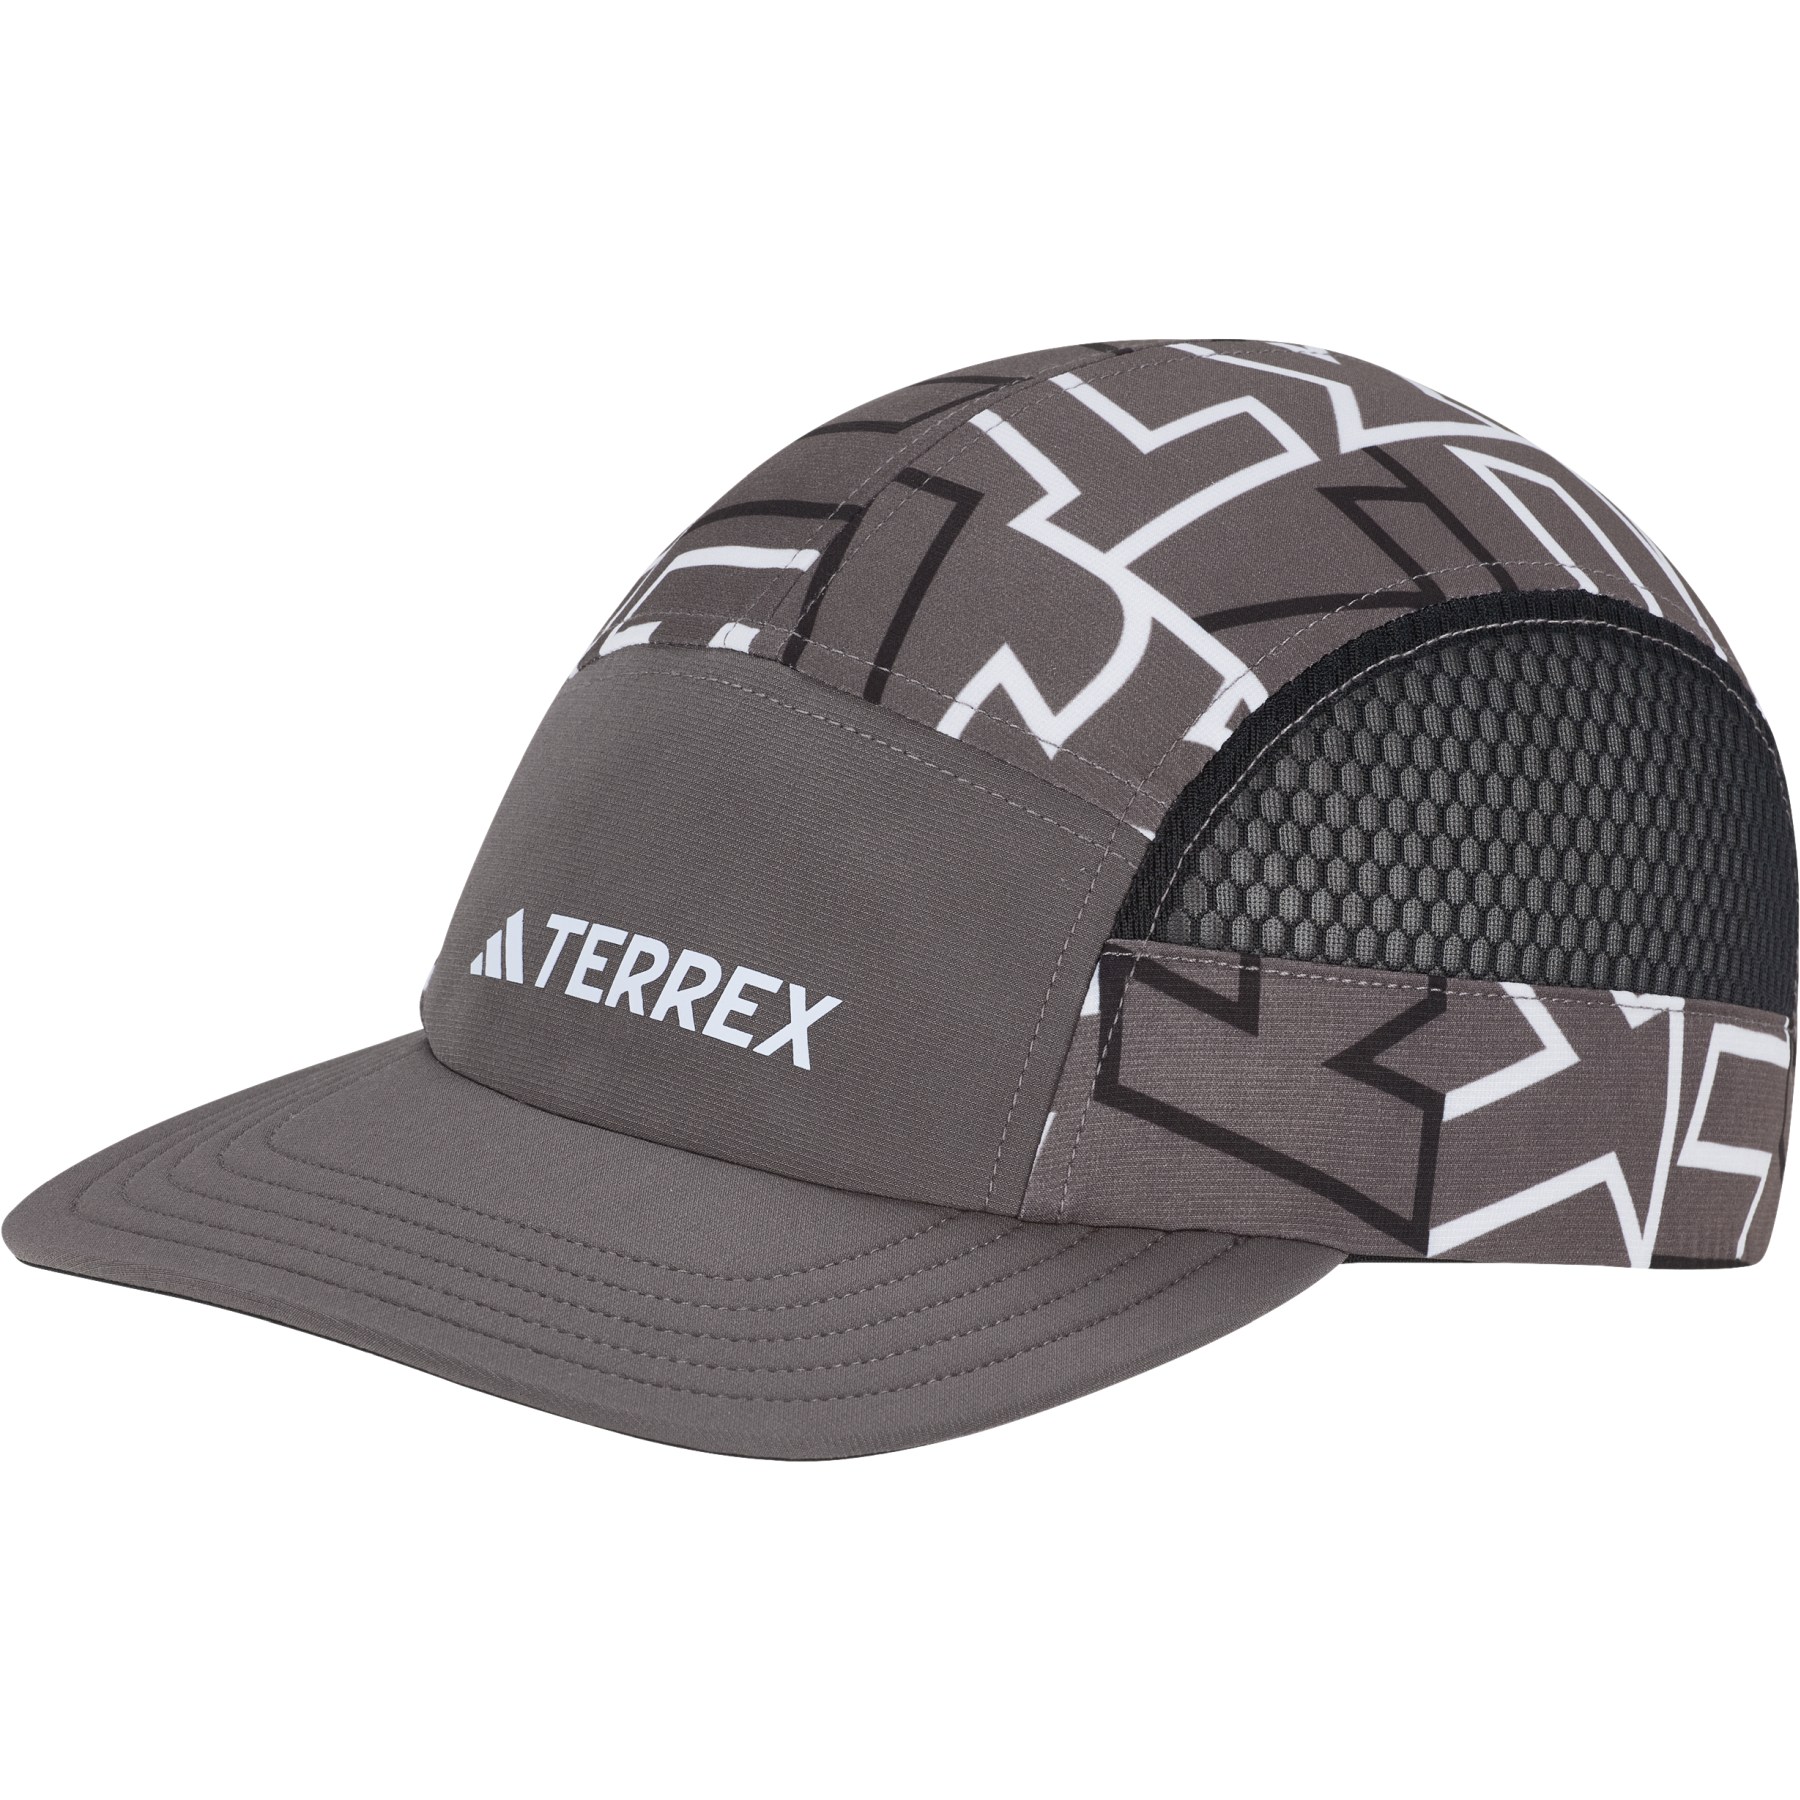 Picture of adidas TERREX HEAT.RDY 5-Panel Graphic Cap - charcoal/white/black IN8287